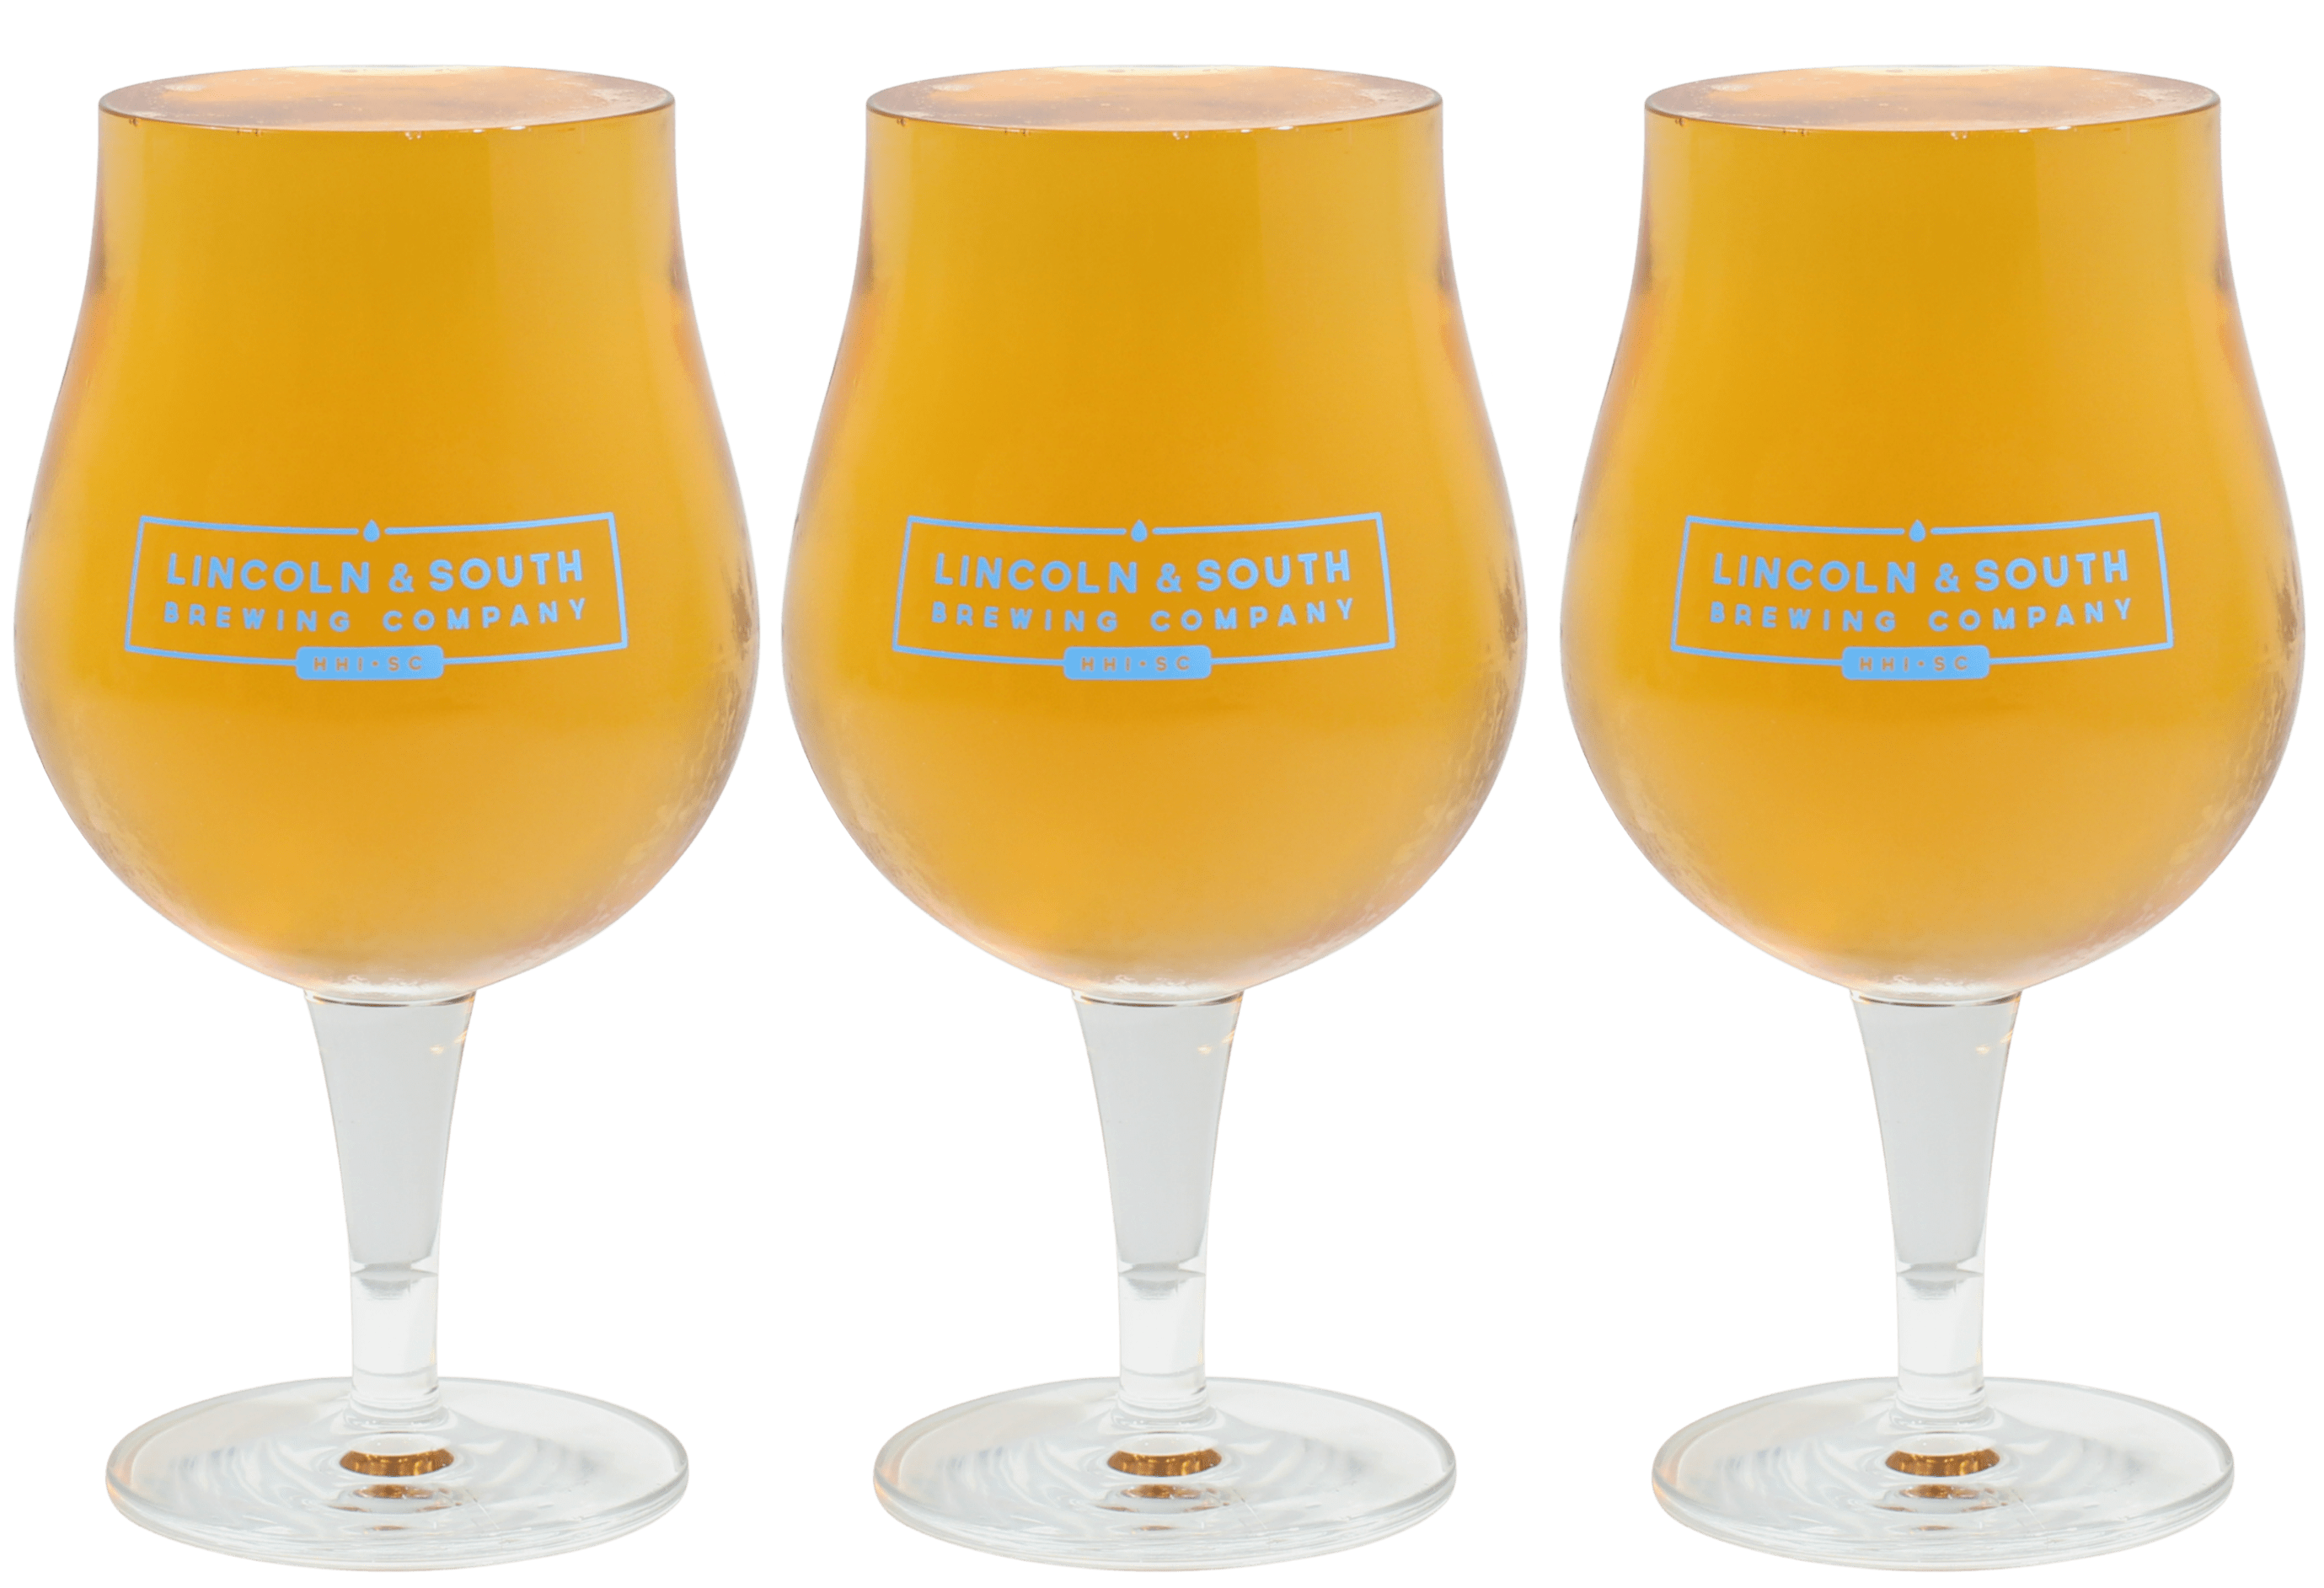 Lincoln & South Brewery on Hilton Head Island, SC, offers Base Sour